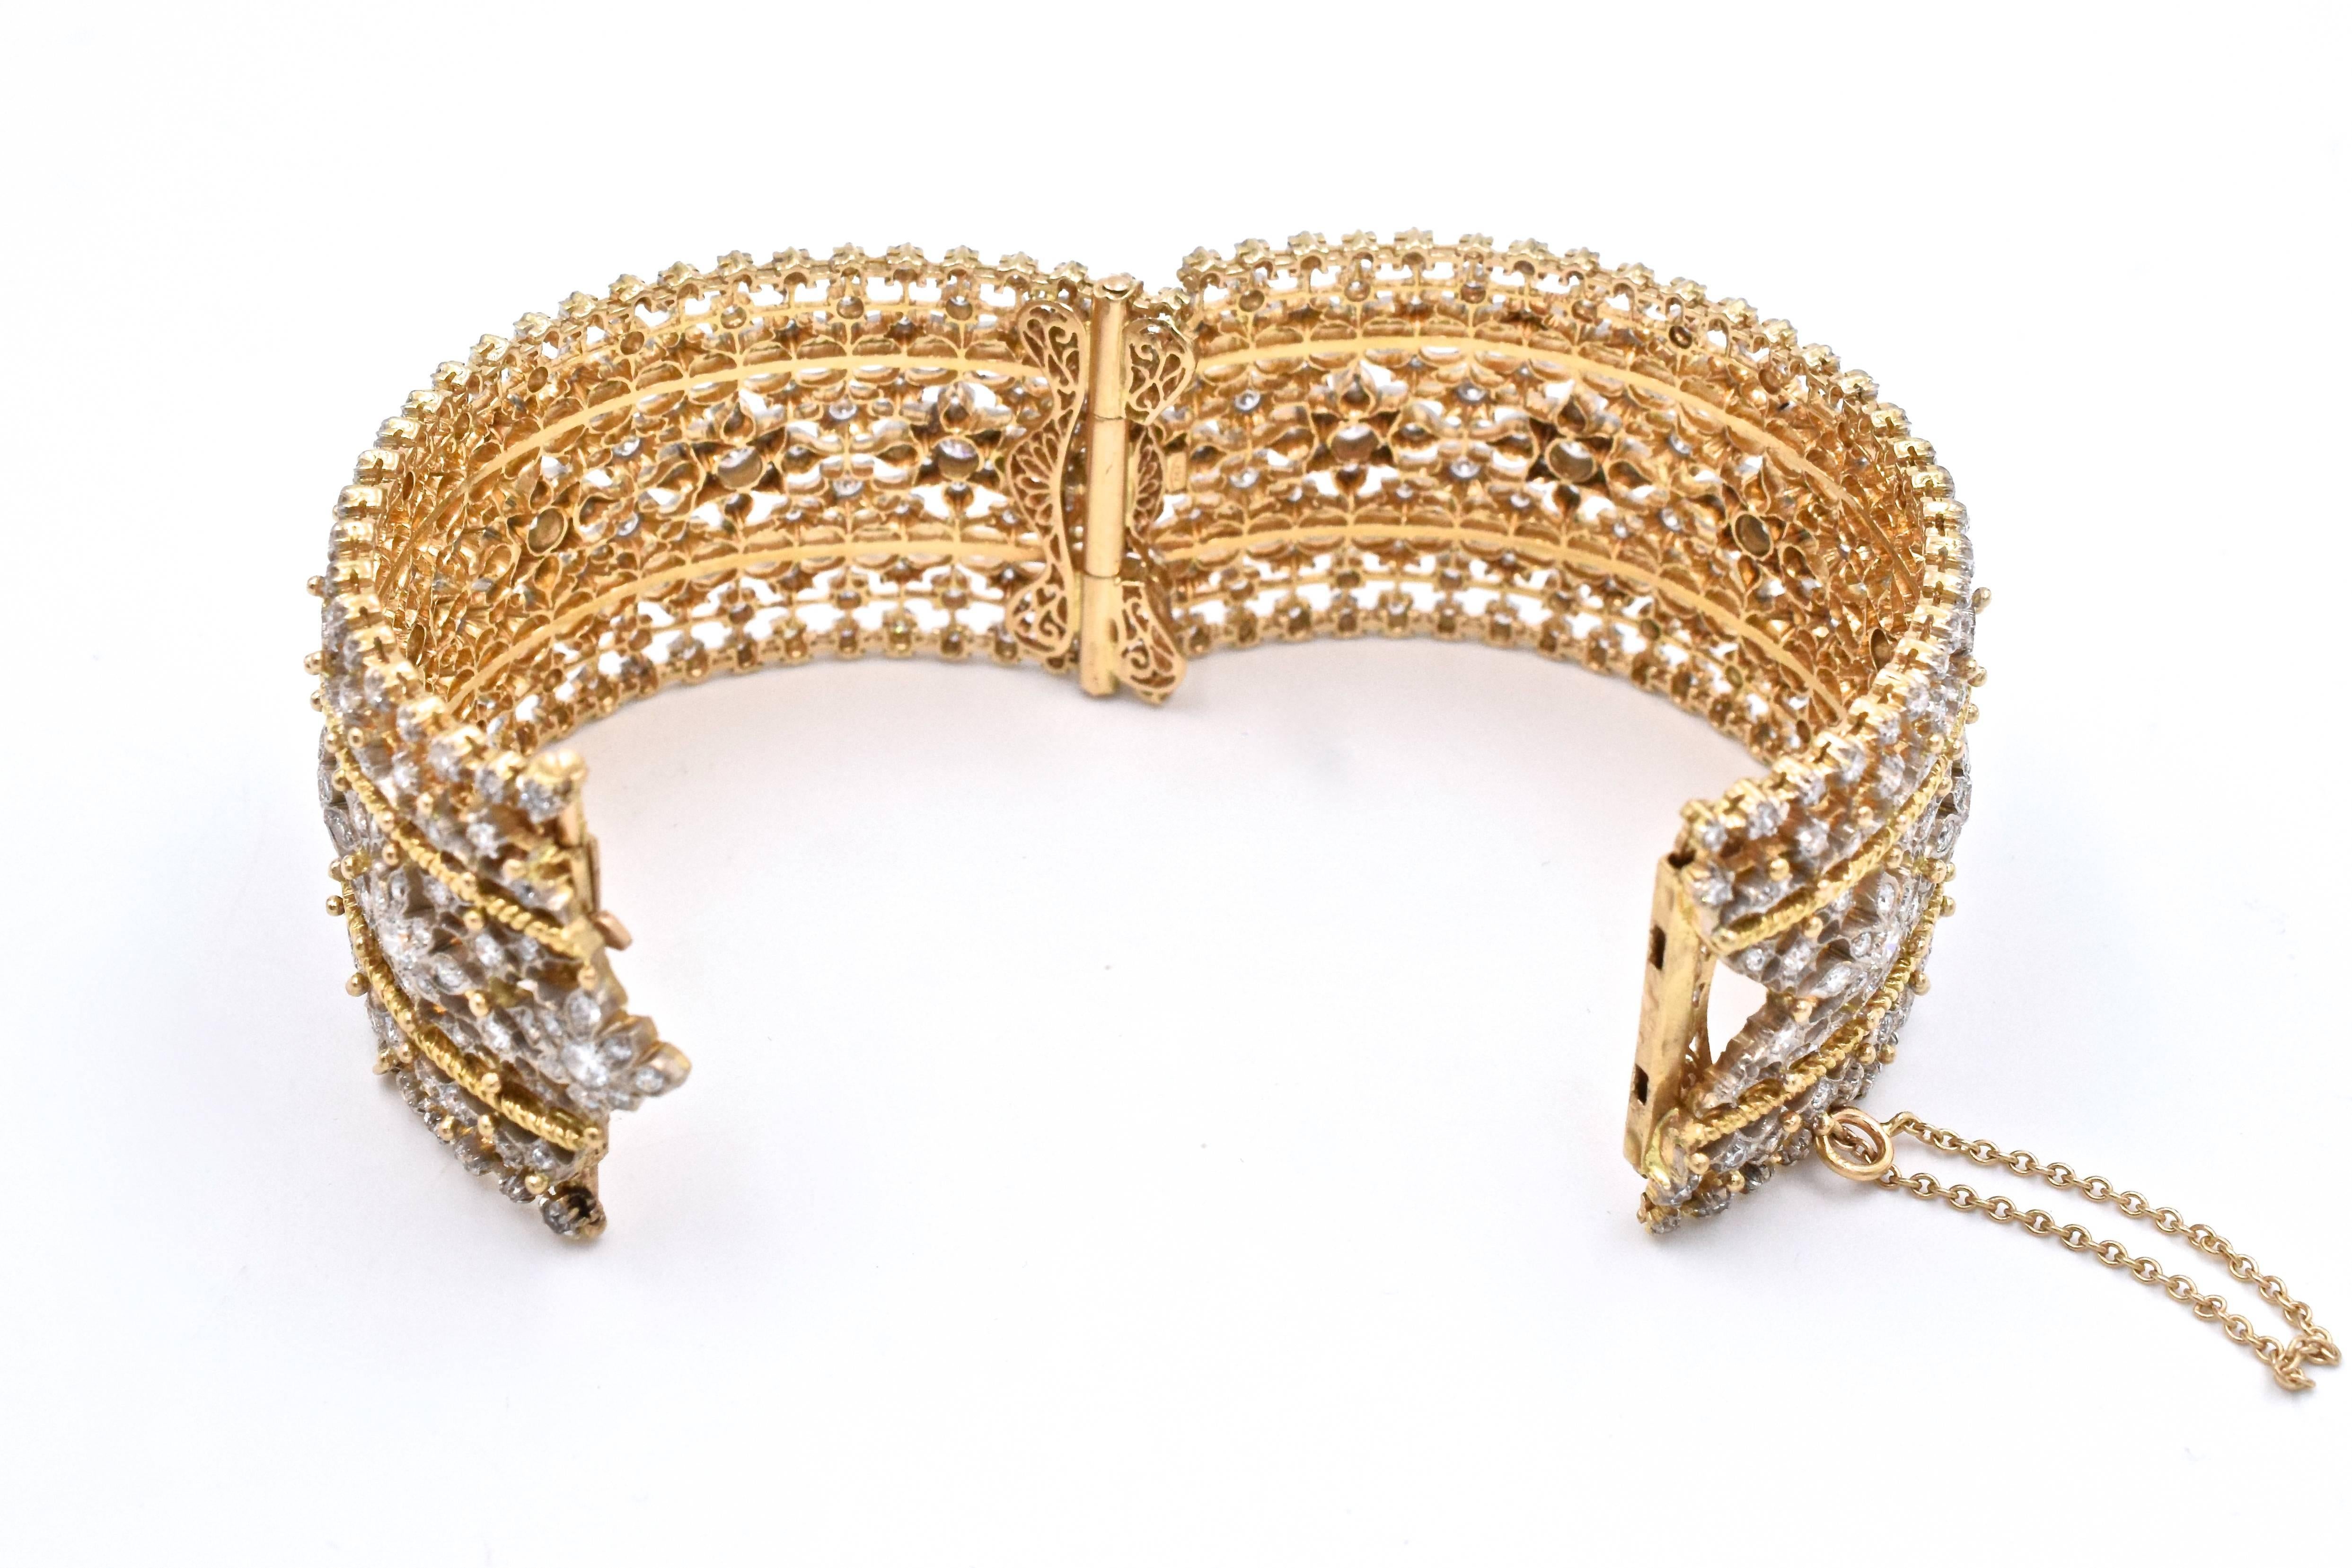 Two-Color Gold and Diamond Cuff Bangle Bracelet,
The delicate openwork cuff centering a line of florets, set throughout with round diamonds approximately 12 carats total weight.
18k gold
 Inner circle 7 inches. Width 1 3/16 inches.